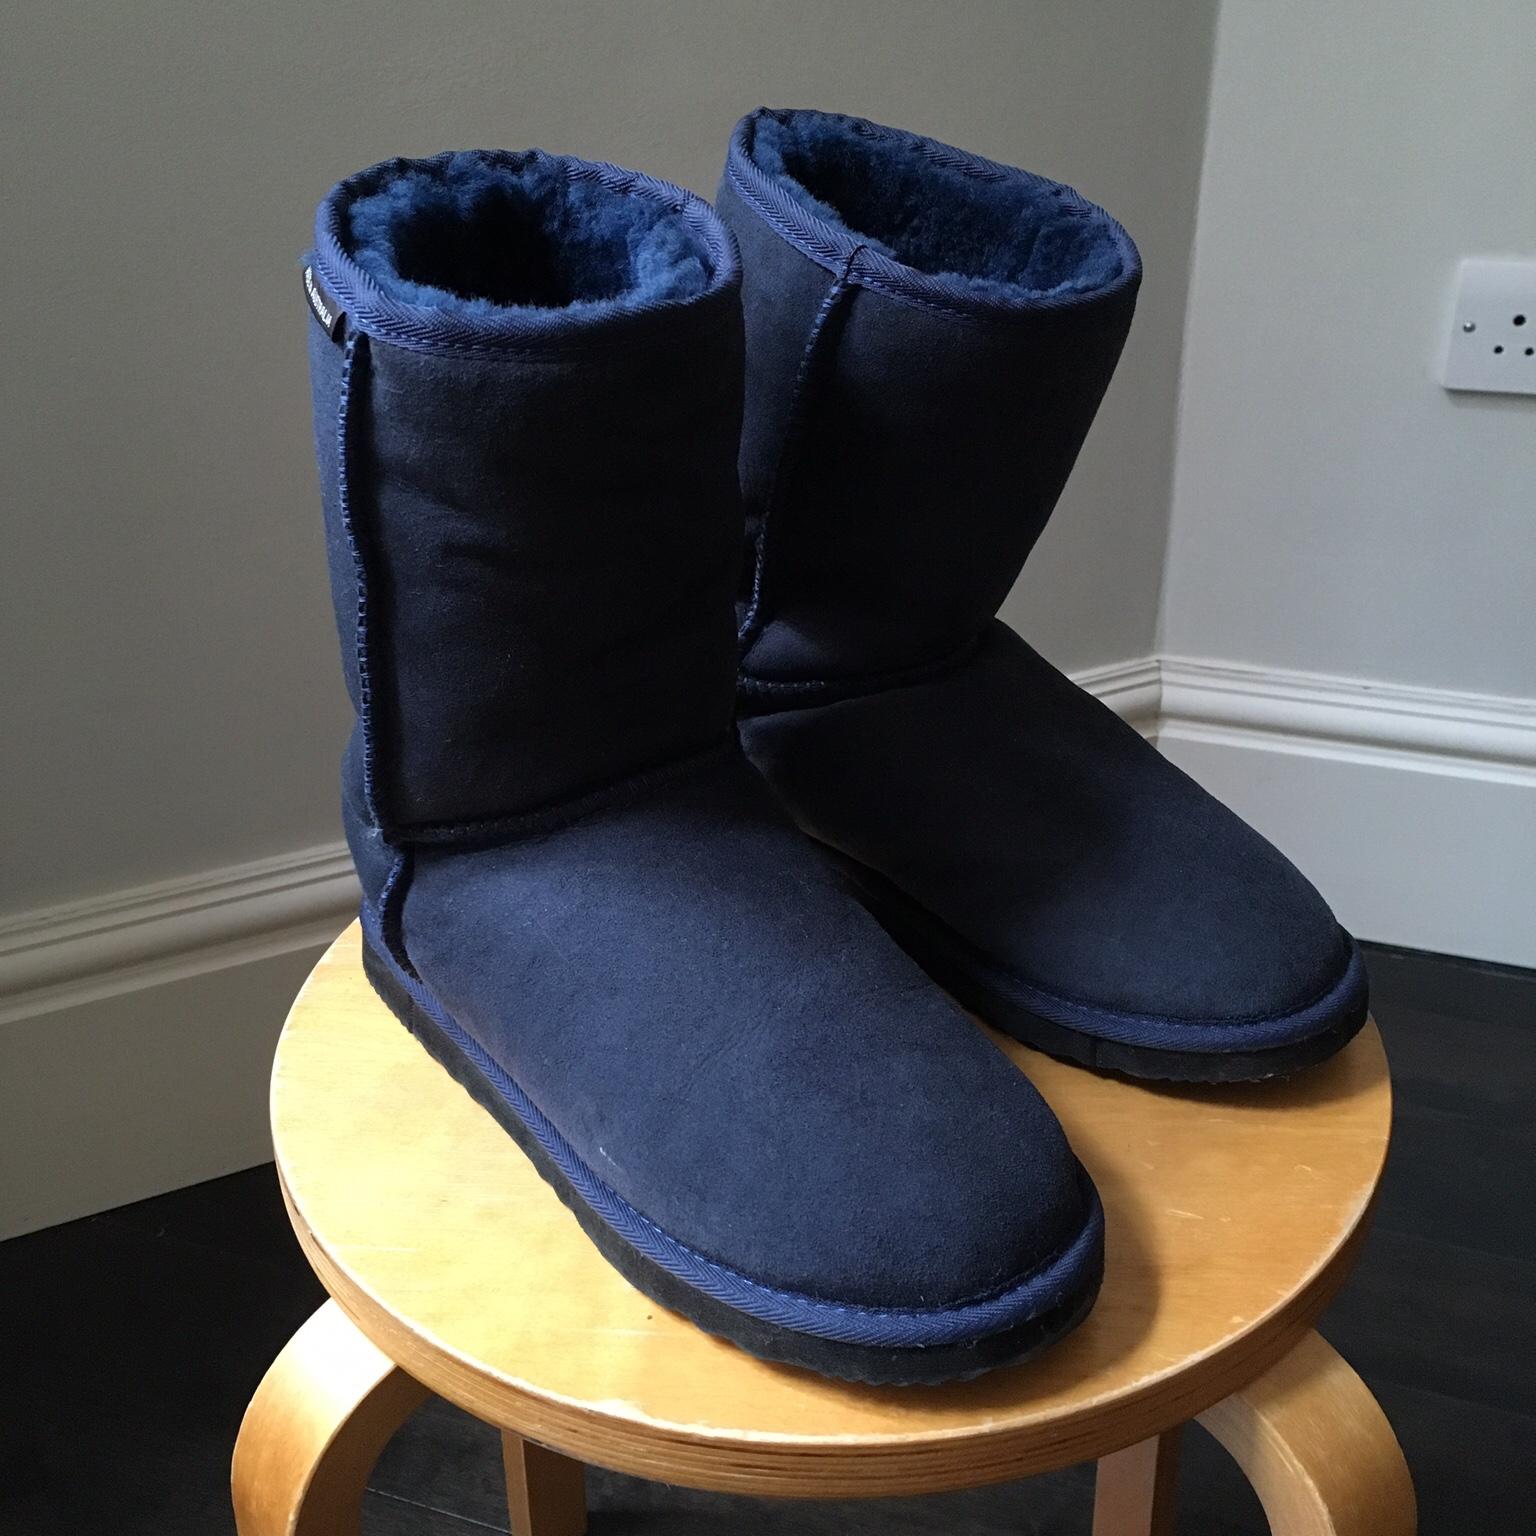 Navy UGG boots in SW1 London for £40.00 